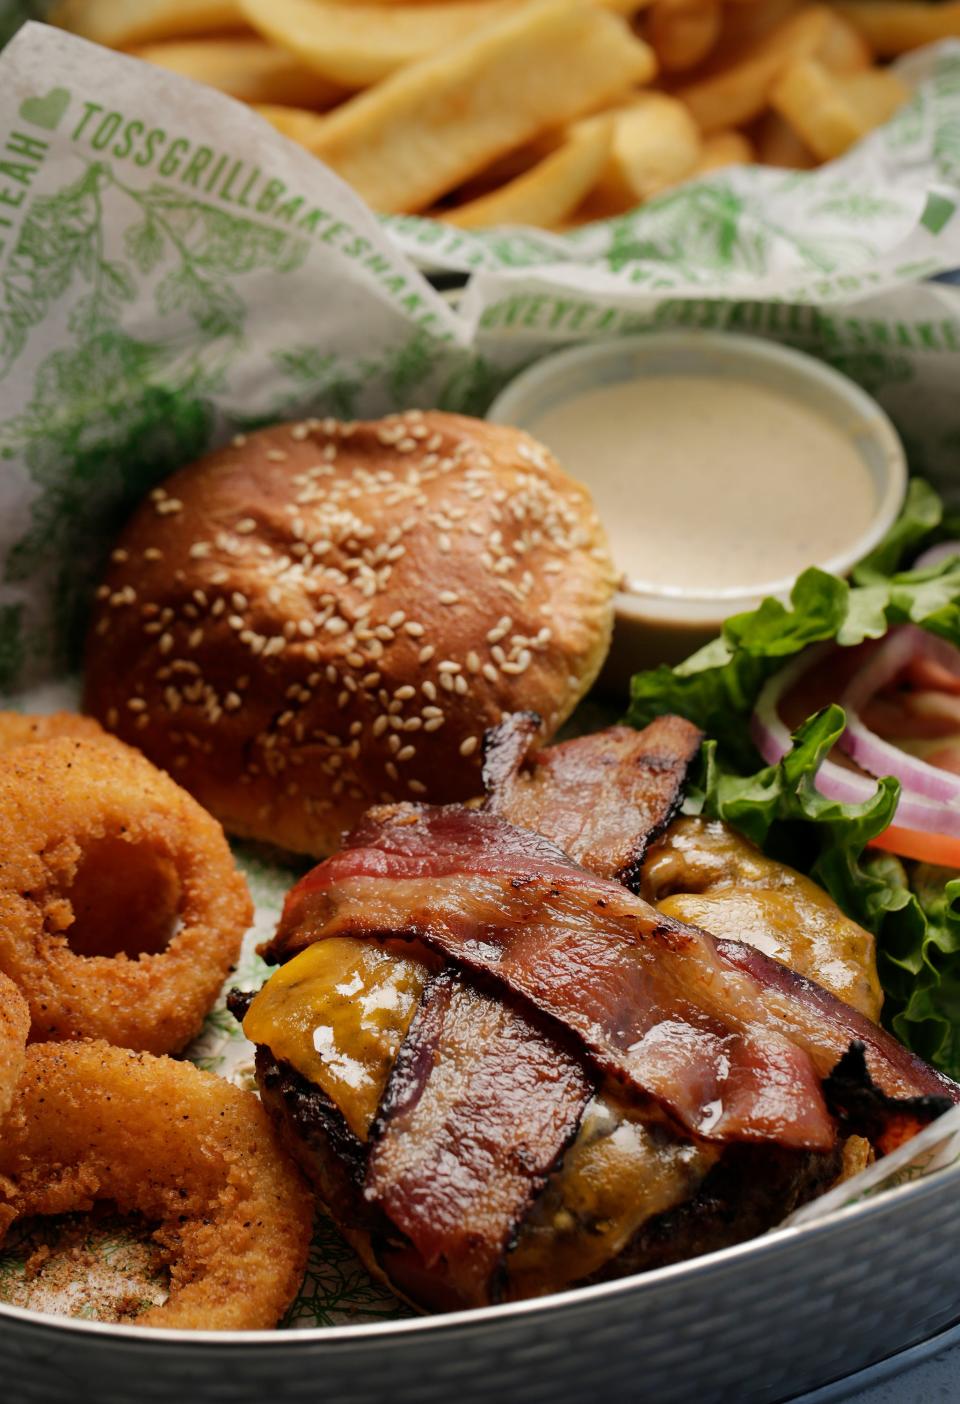 The Loop's Bacon Cheddar Burger is made with applewood smoked bacon and cheddar cheese, and includes a side of onion rings.